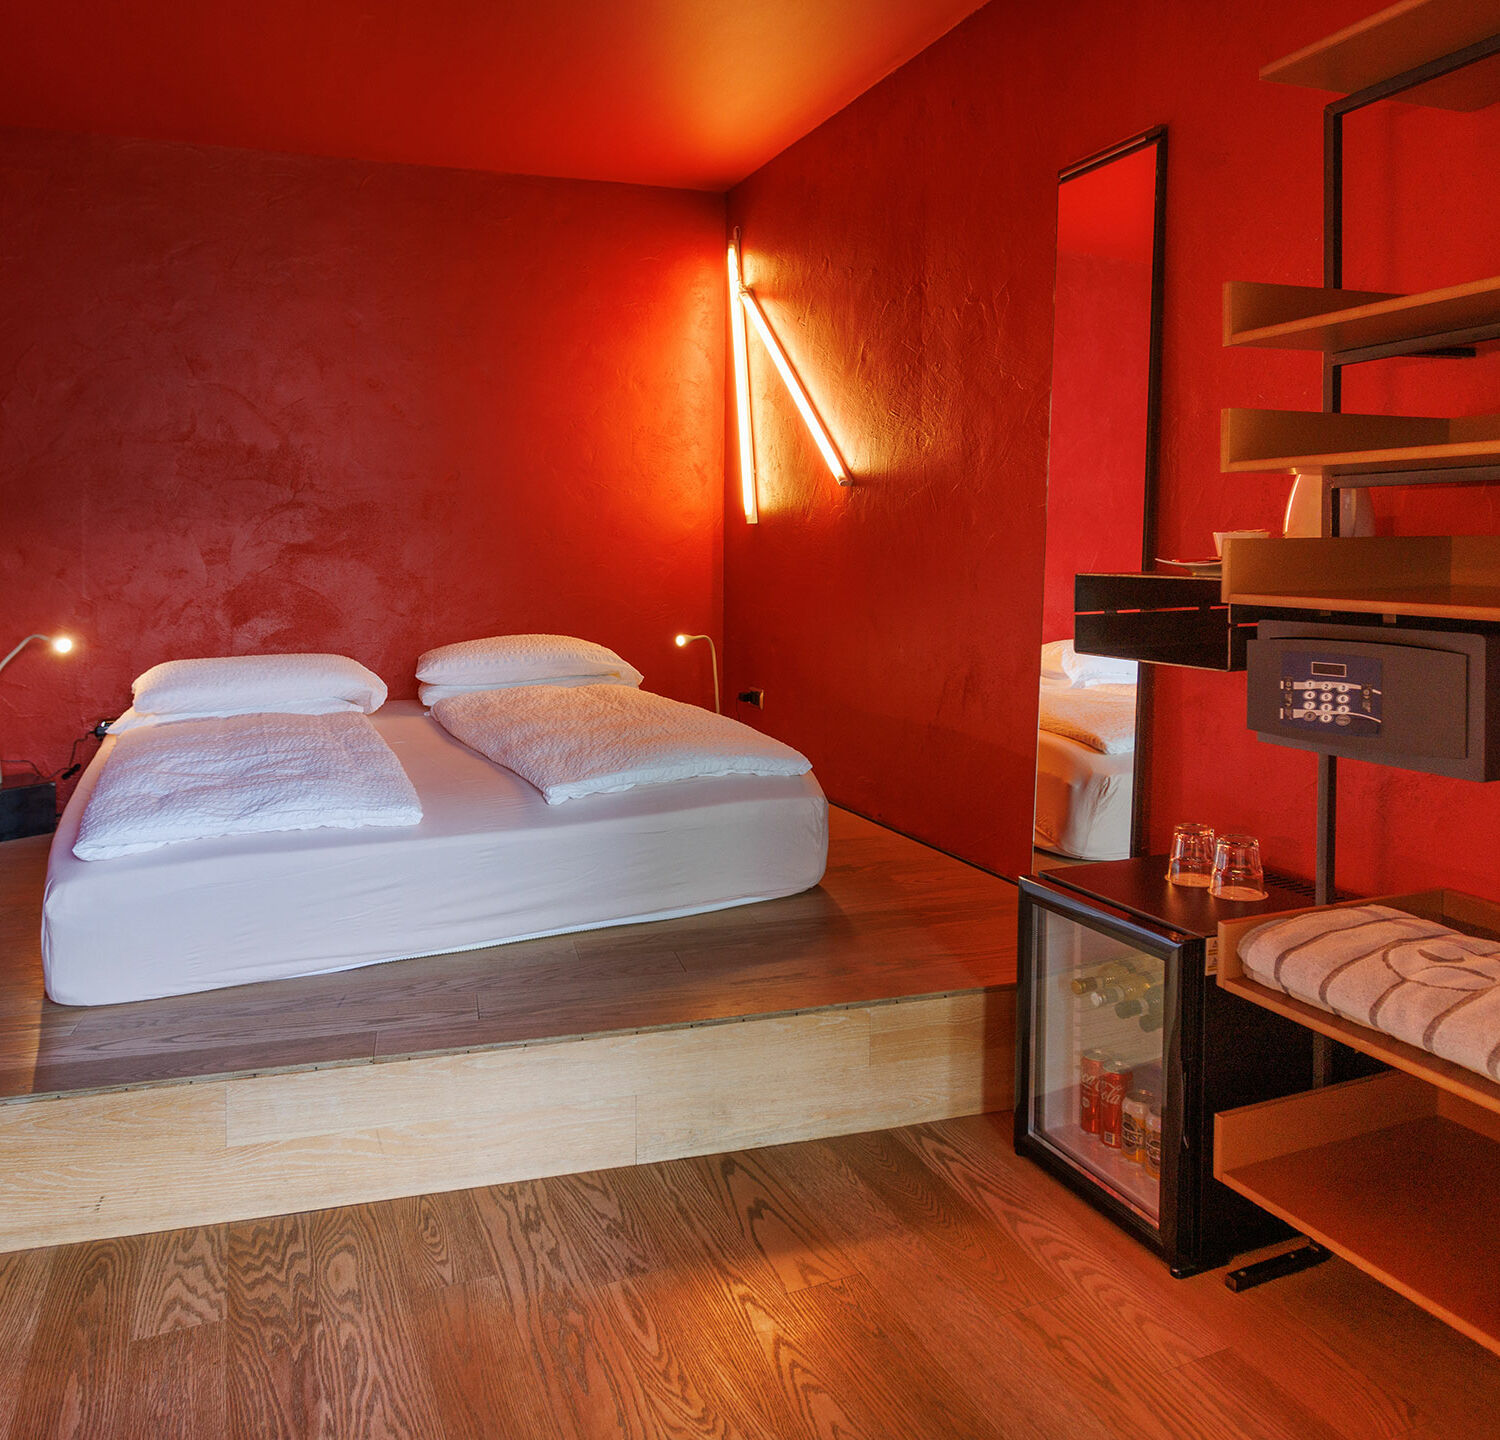 Sleep different-Ideal for spicy nights-La Rossa